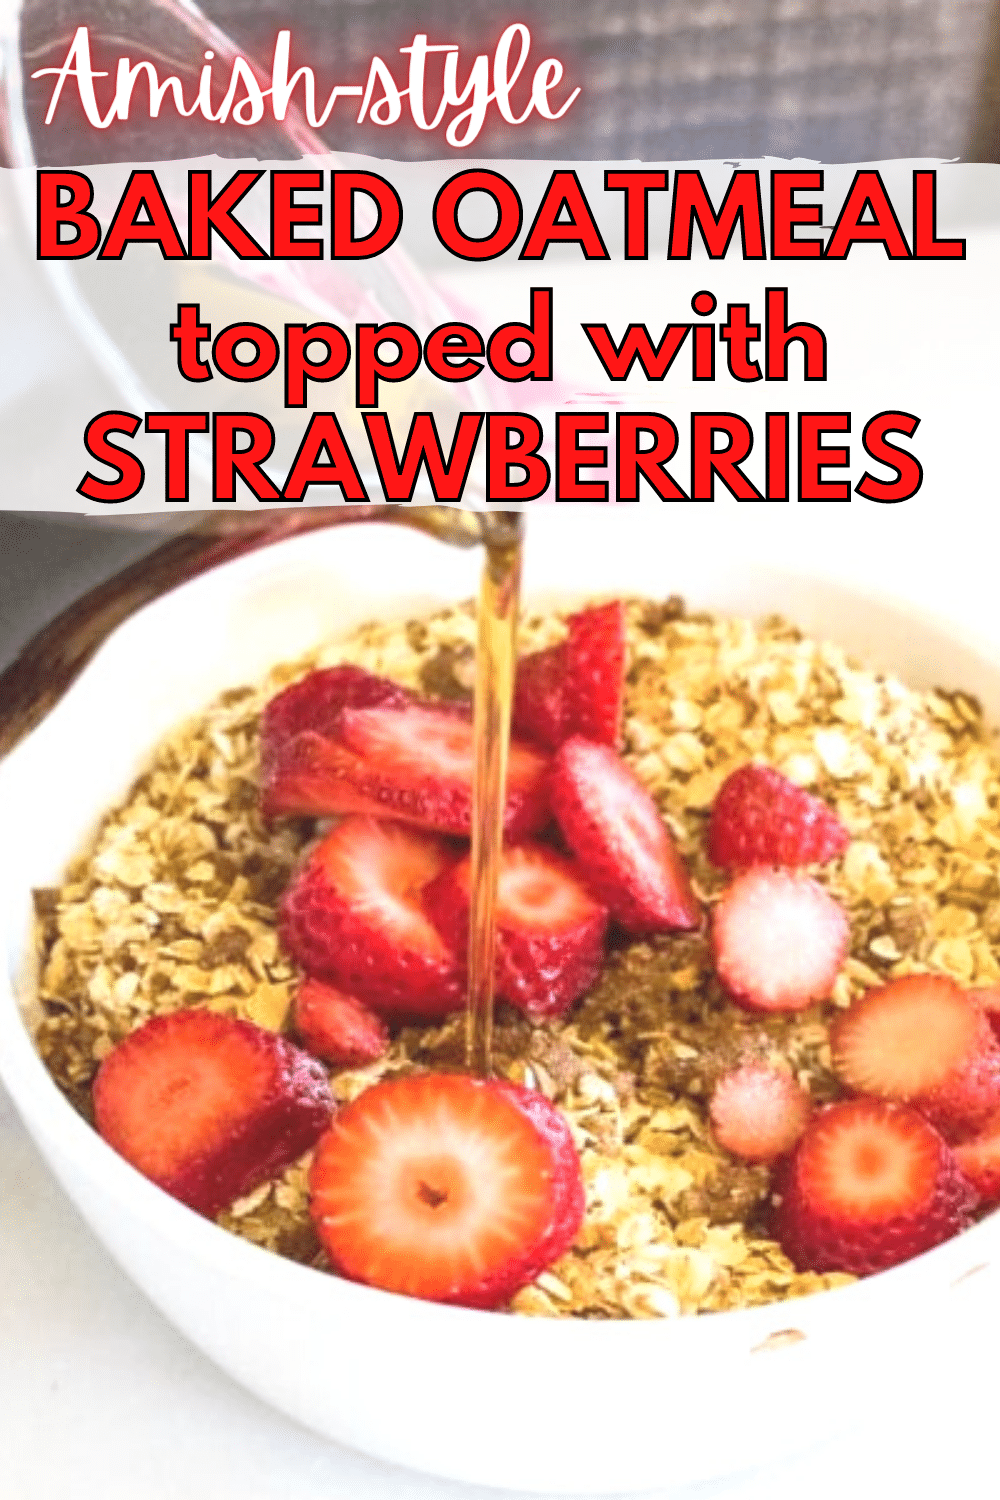 Amish Baked Oatmeal Topped with Strawberries is a delicious recipe for breakfast or brunch. It also only has 5 ingredients and is very simple to make. #oatmeal #amishrecipe #breakfast #strawberries via @wondermomwannab